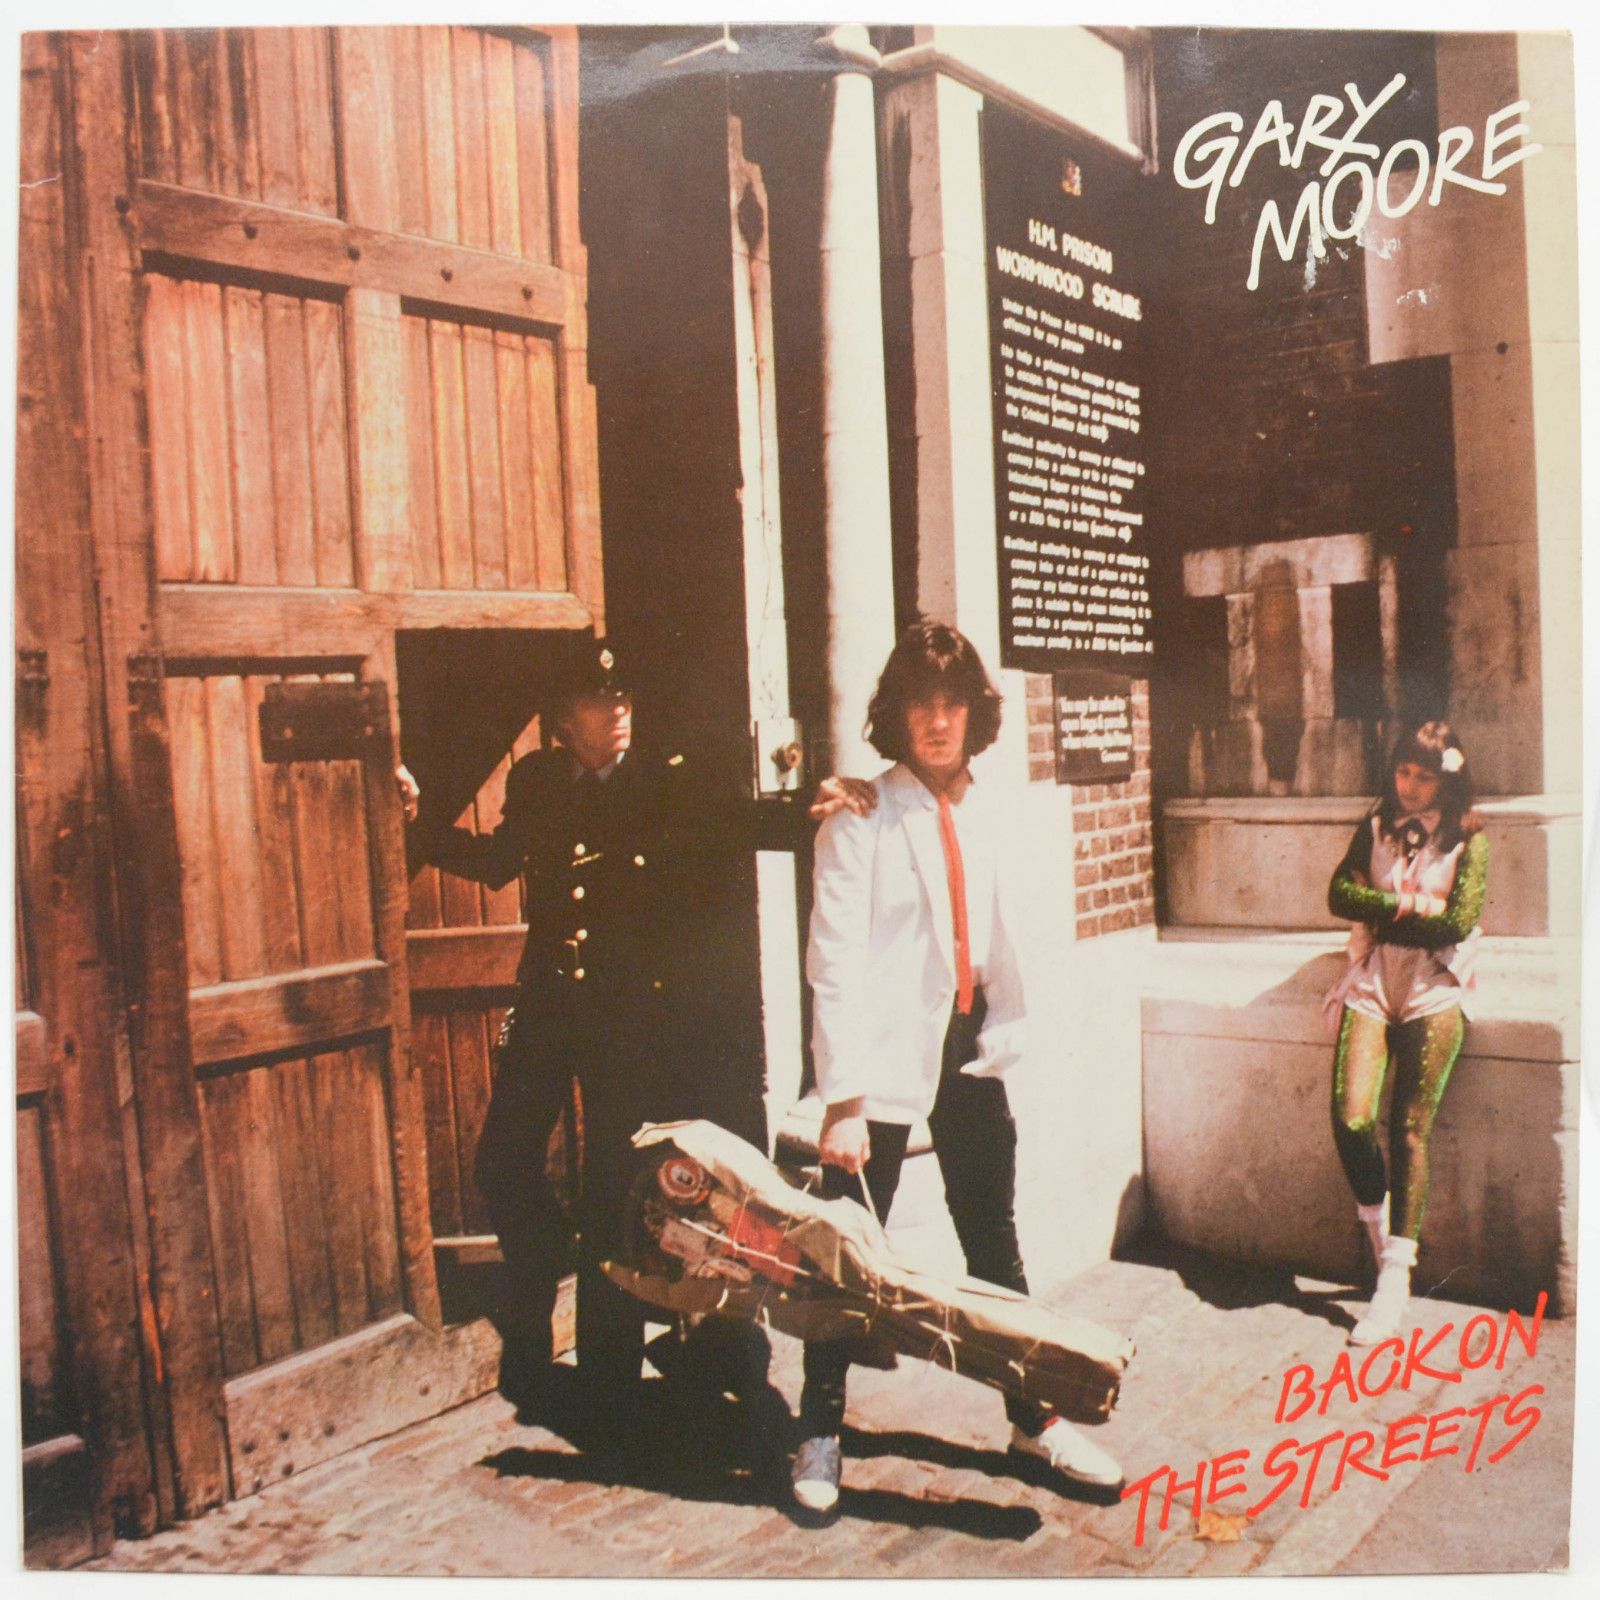 Gary Moore — Back On The Streets, 1985